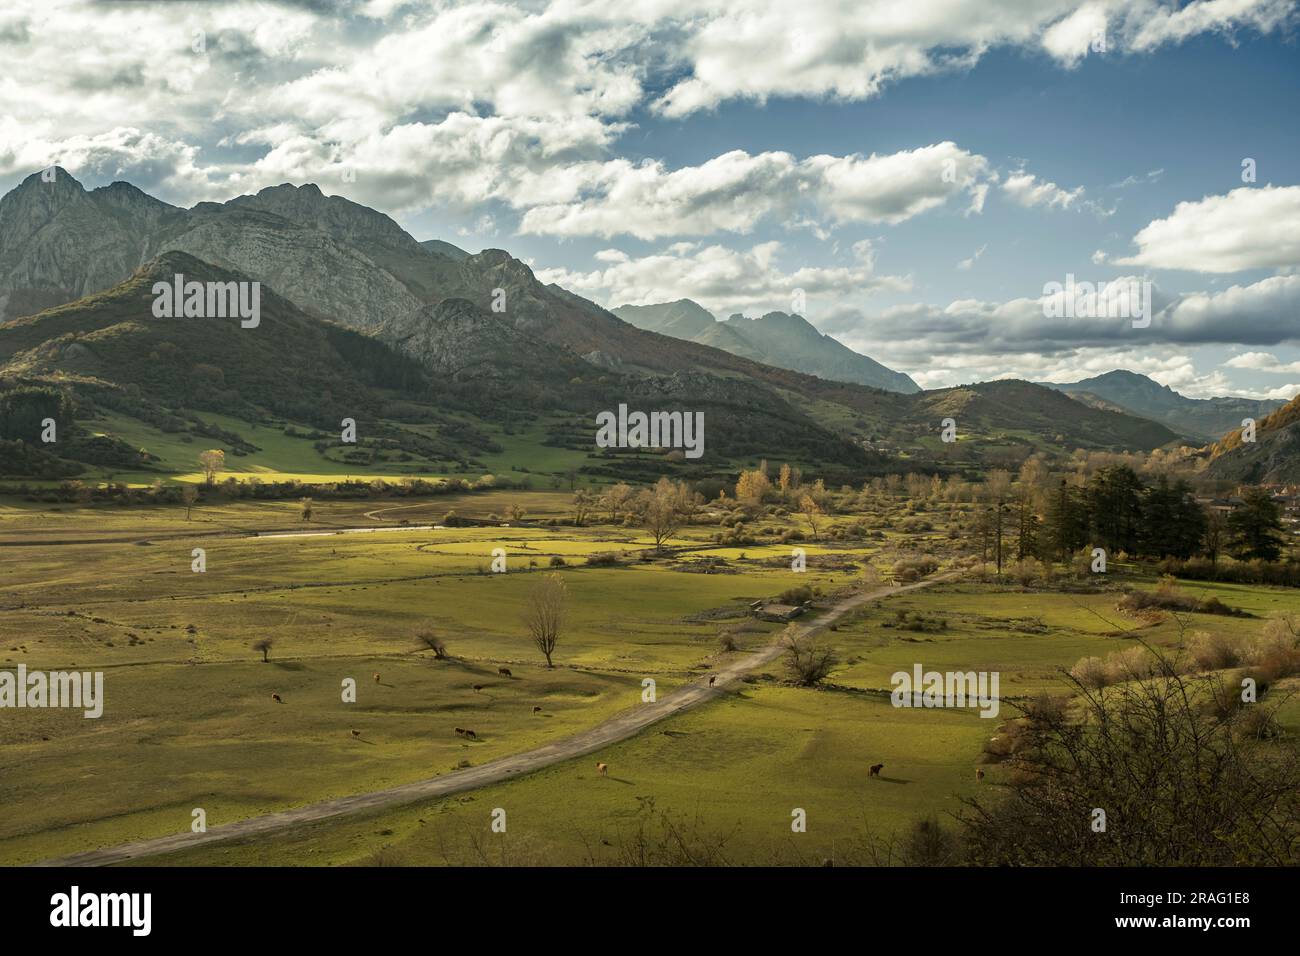 Beautiful mountain landscape with green pastures and an old road in the submerged Buron valley visible due to the low water level of the Riaño reservo Stock Photo